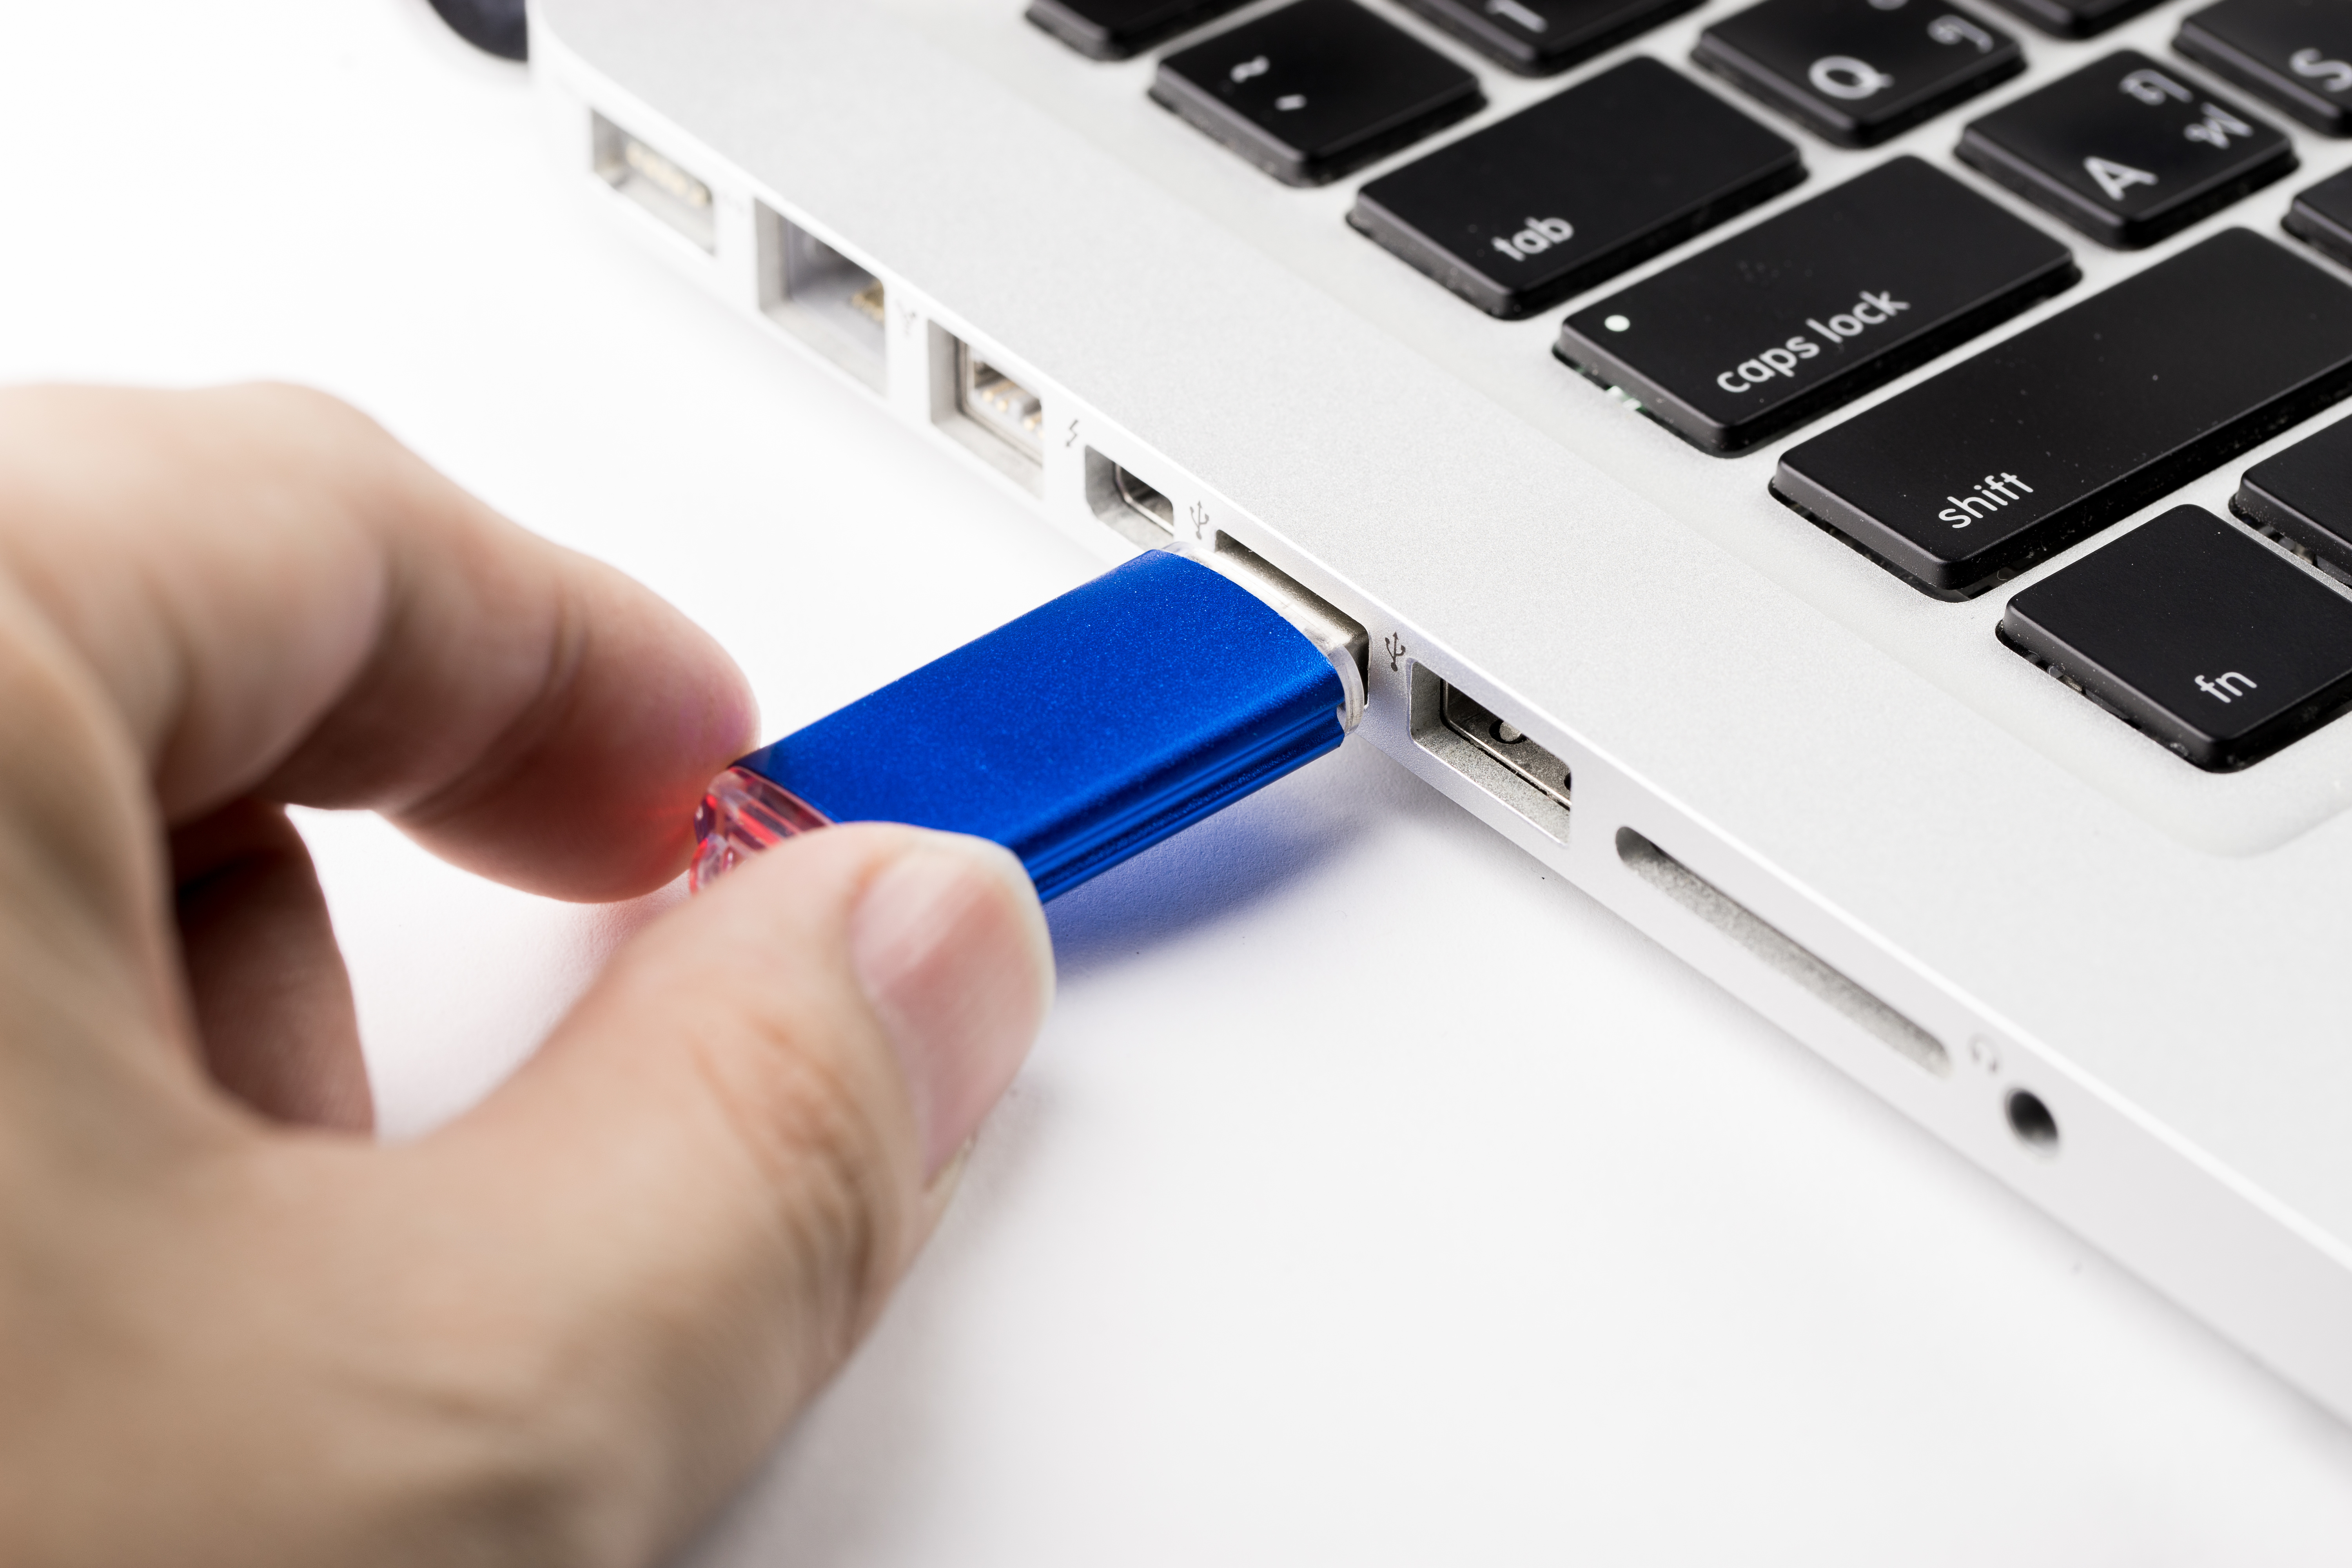 Insert the flash drive into a USB port on your computer.
Ensure that the computer recognizes the drive.